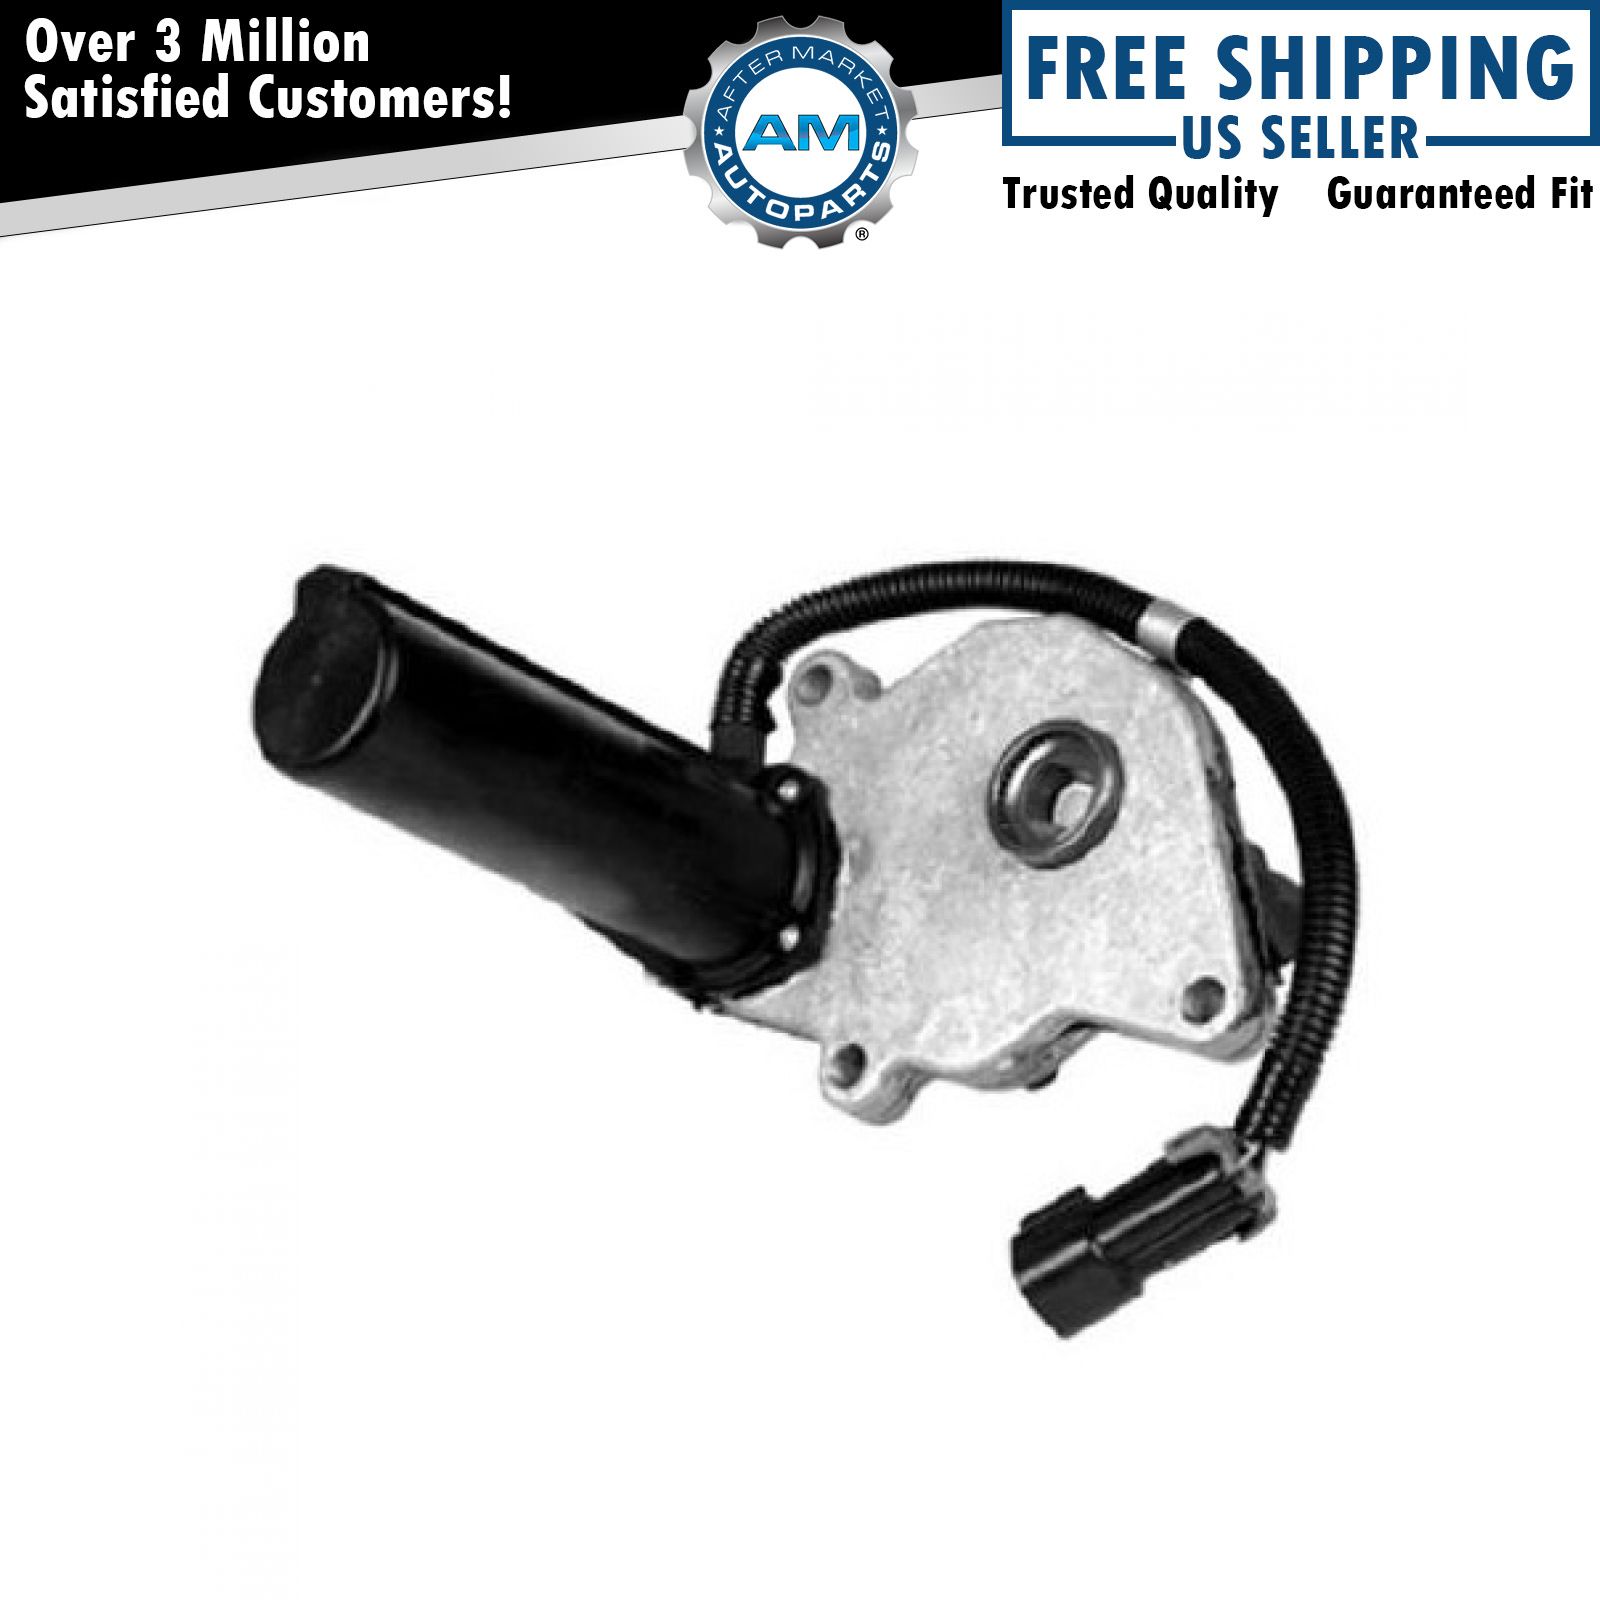 Dorman Transfer Case Shift Motor for Cadillac Chevy S10 GMC Pickup Truck Olds